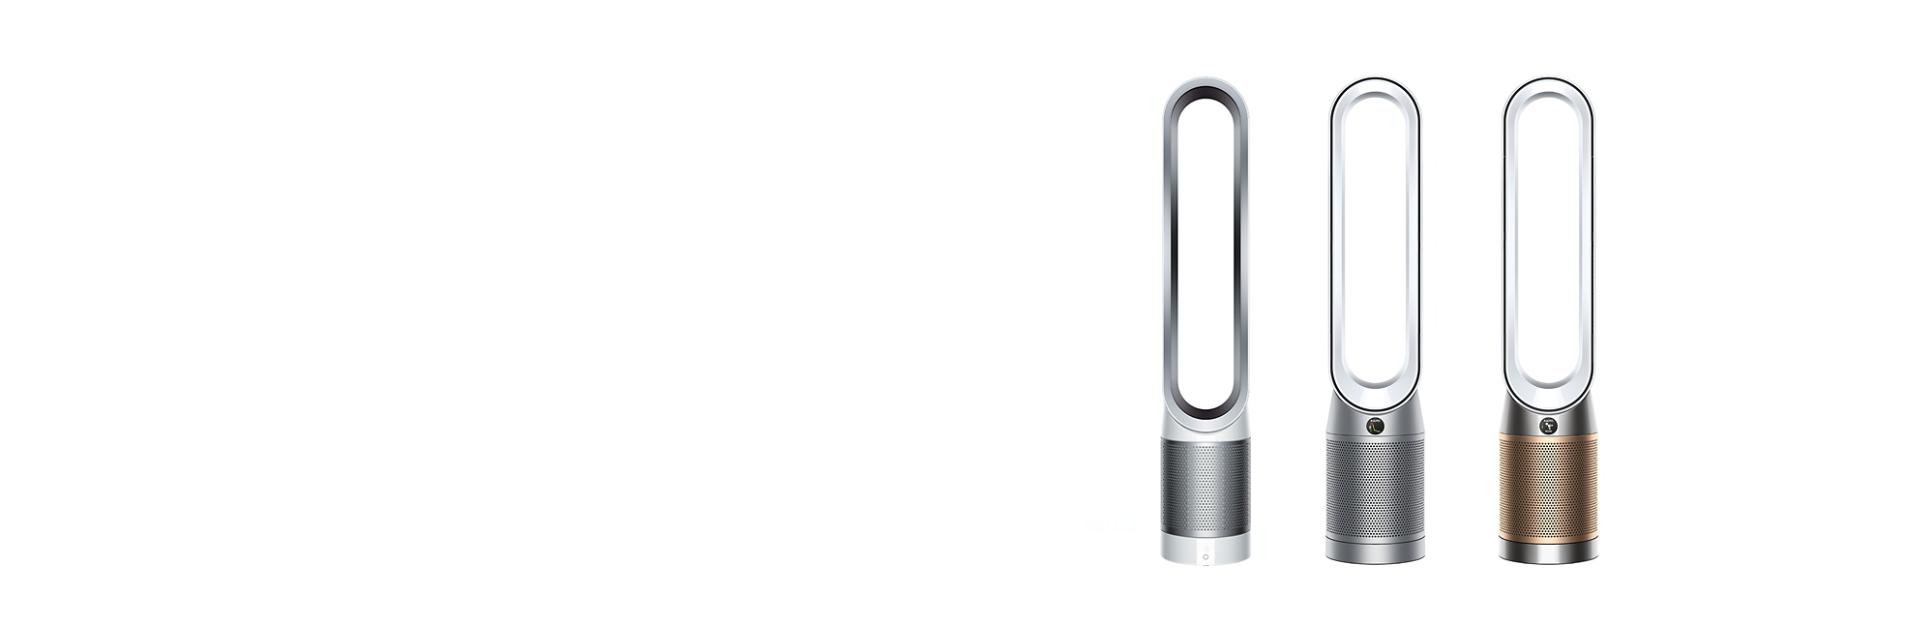 Dyson Pure Cool, Dyson Purifier Cool and Dyson Purifier Cool Formaldehyde 